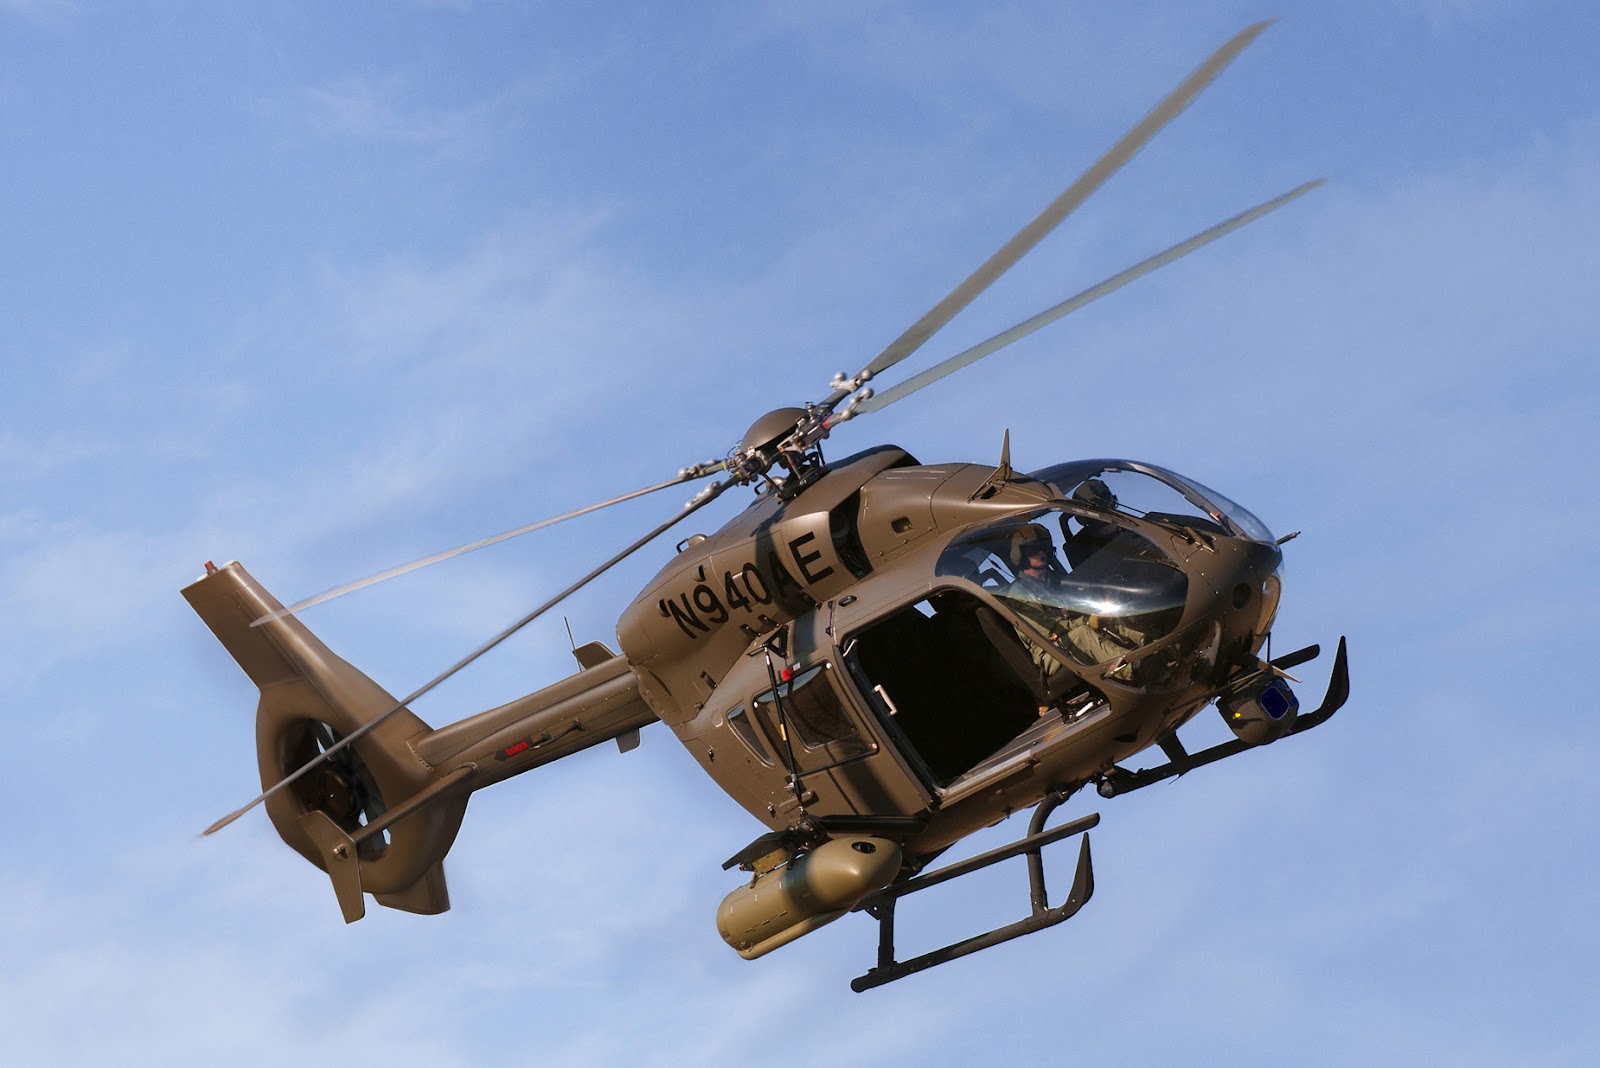 Helicopter News - Página 2 Eurocopter_EC625_AAX72_X+_Armed+Scout_helicopter_helic%C3%B3ptero_Asa+Rotativa_02